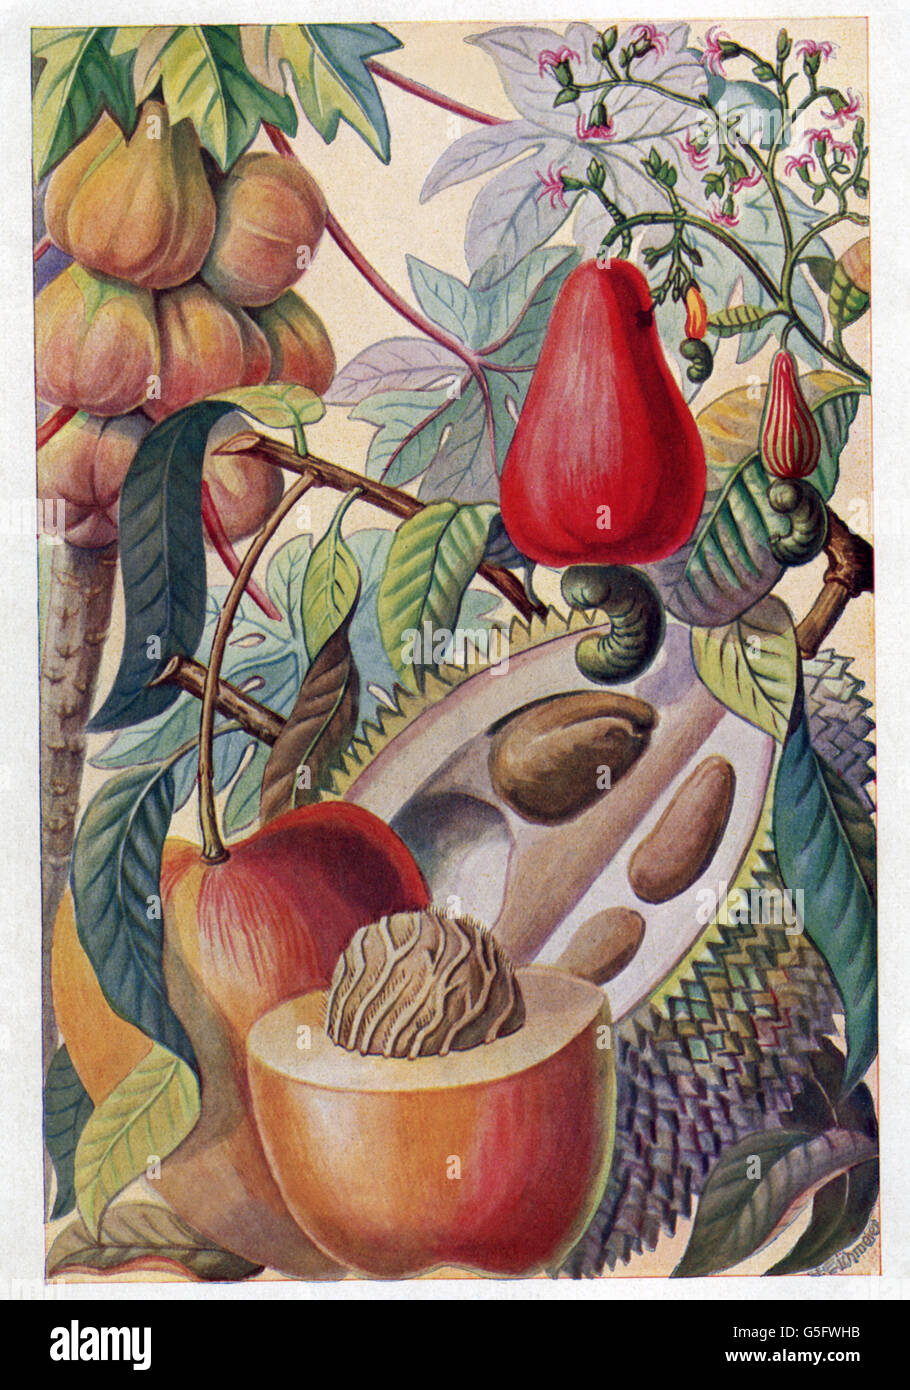 botany, fruit, tropical fruits: papaya, Cachou fruit or Anacarde, mango, durian fruit, colour printing after watercolour, early 20th century, cachou, durian, plant, plants, historic, historical, 1900s, 1910s, Additional-Rights-Clearences-Not Available Stock Photo